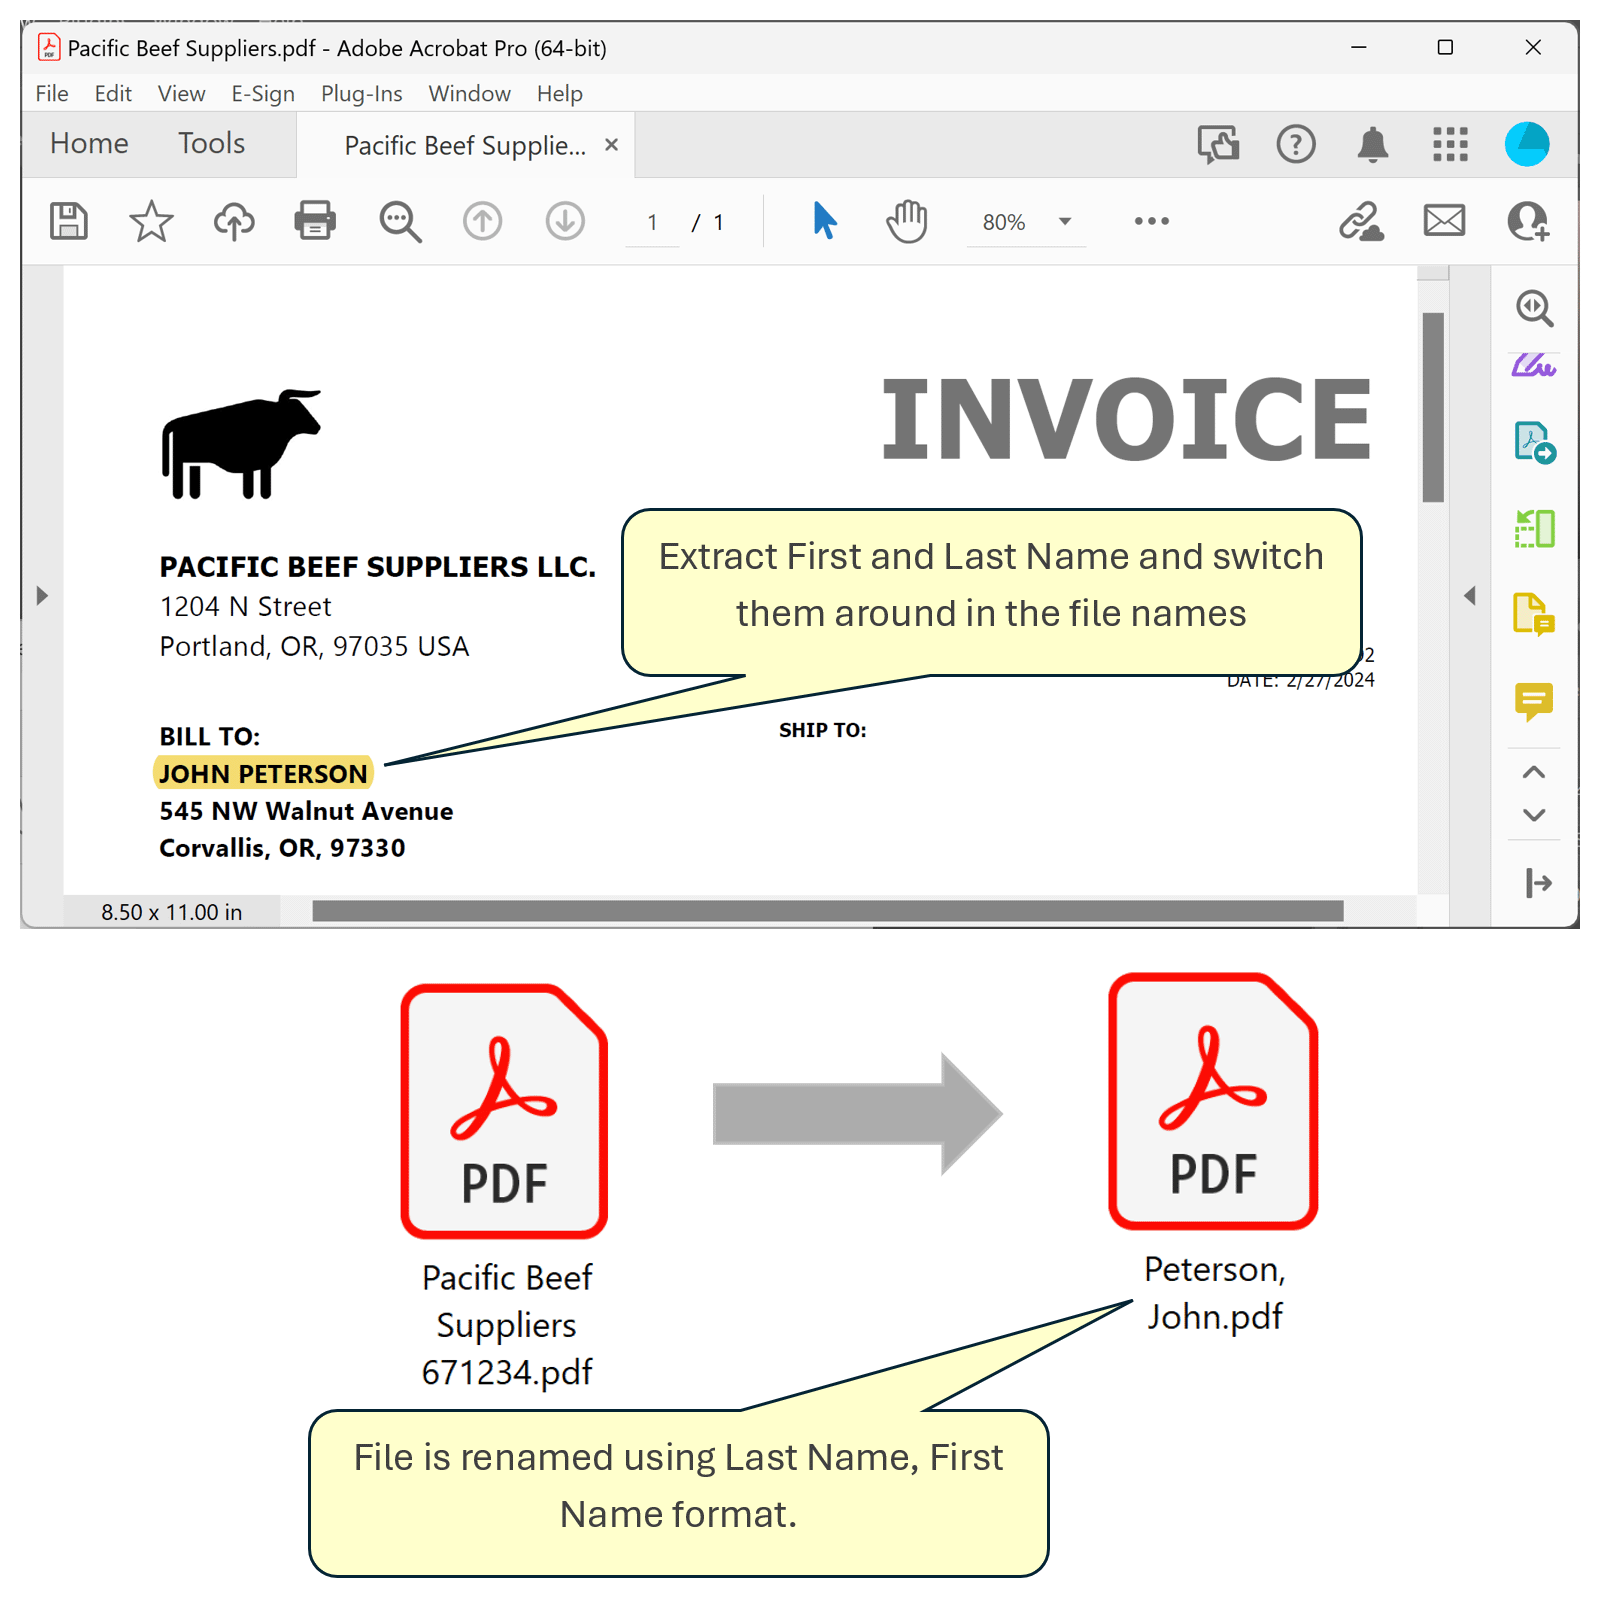 Rename PDF files using text from the document and switch last and first name around